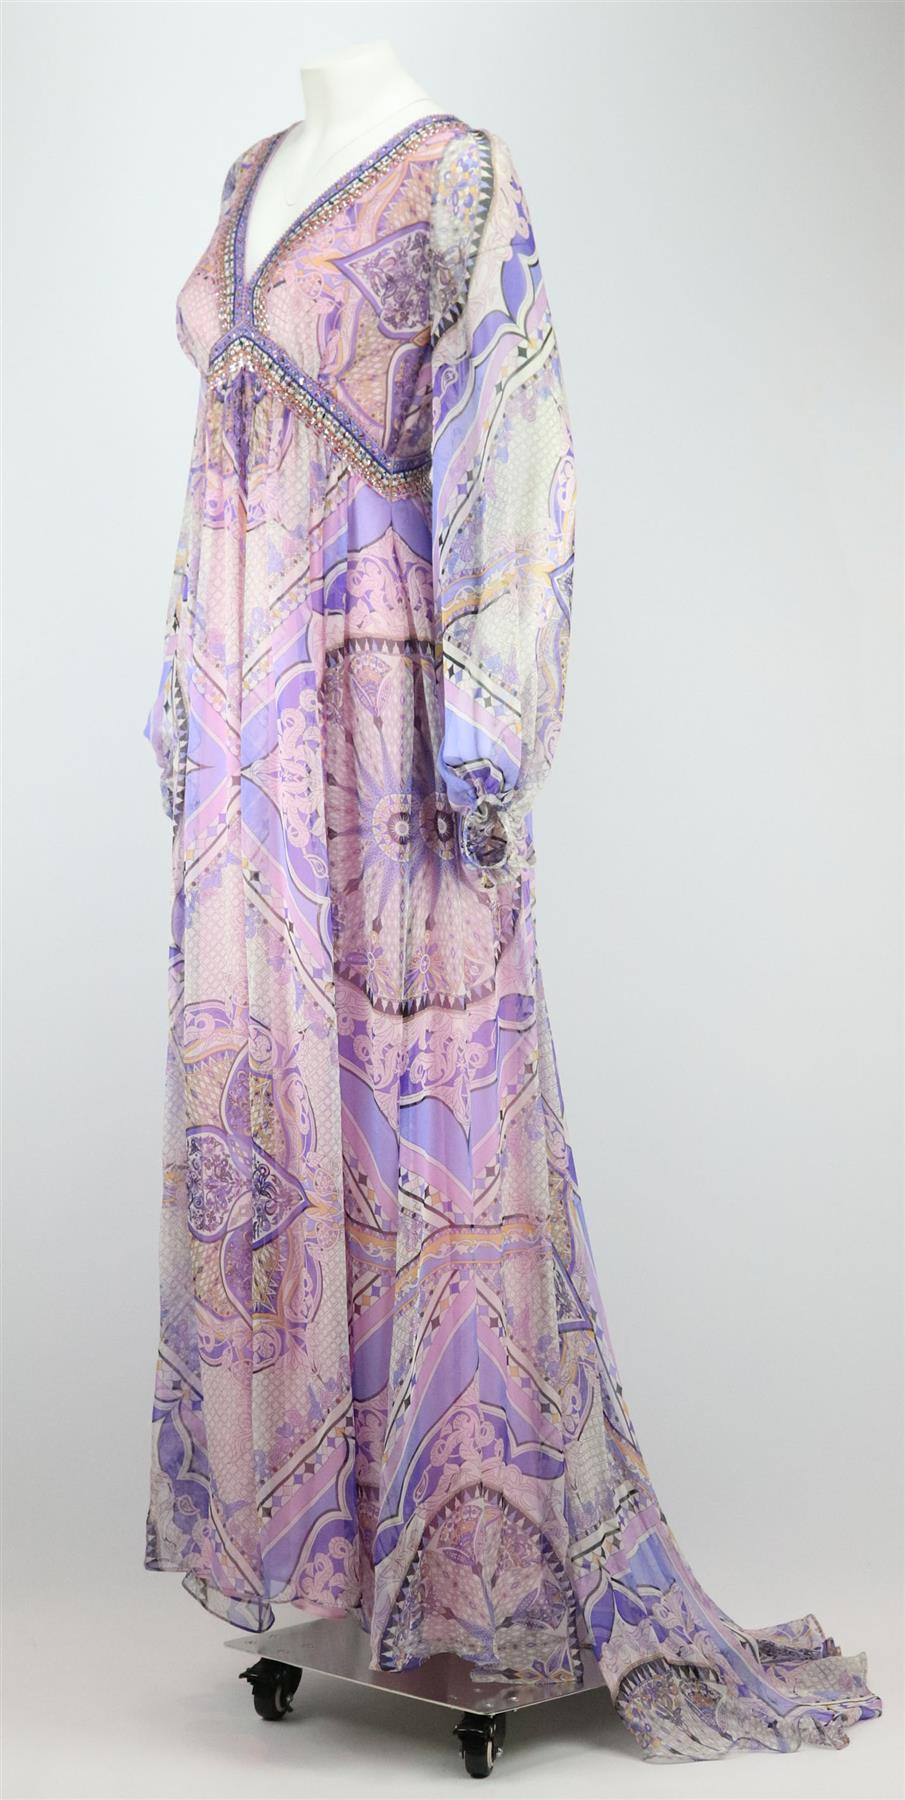 This gown by Emilio Pucci is decorated with the brand’s colourful iconic print, this silk-chiffon dress has a flattering v-neck silhouette and delicate crystals along the neckline. Multicoloured silk-chiffon. Concealed zip fastening at back. 100%